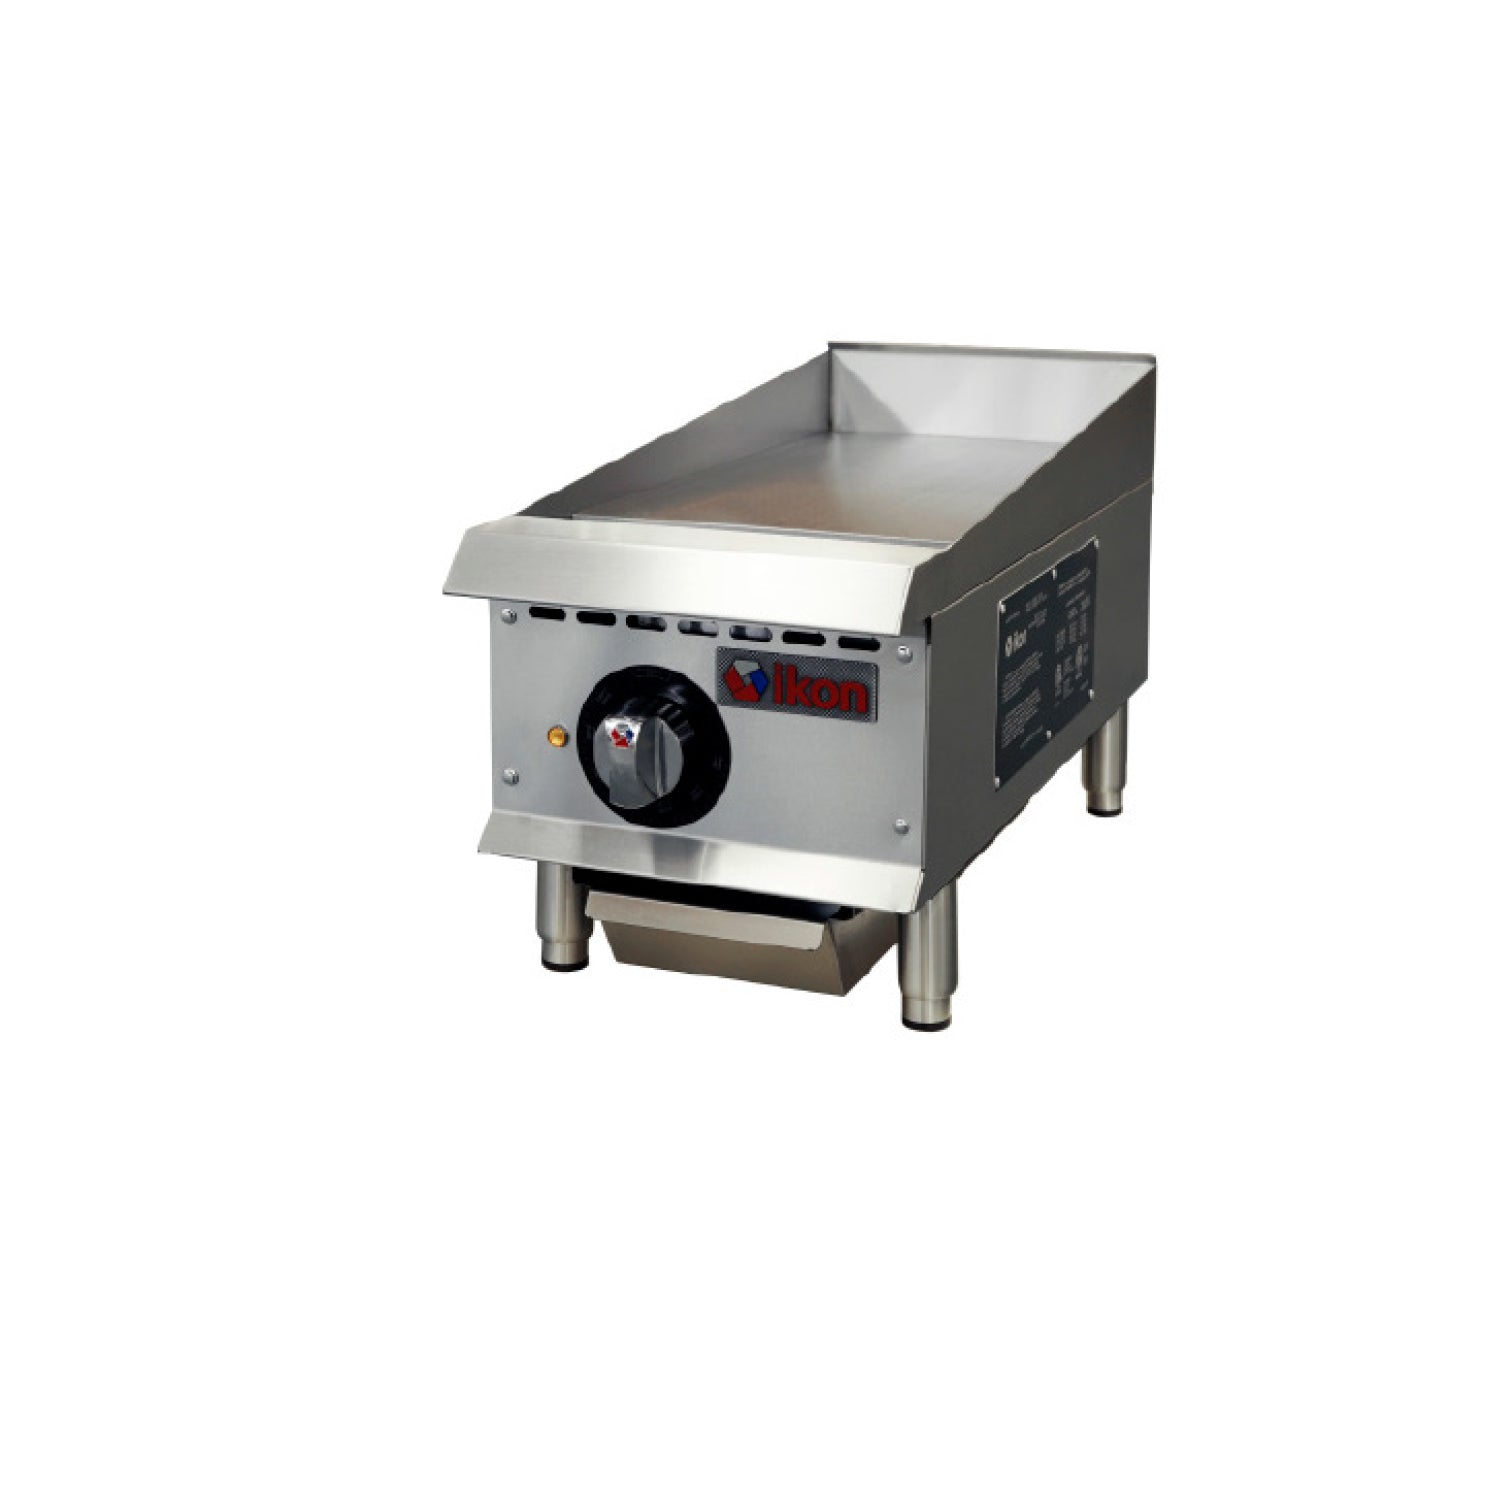 IKON - ITG-12E, 12" Electric Griddles With 4.0 KW Power